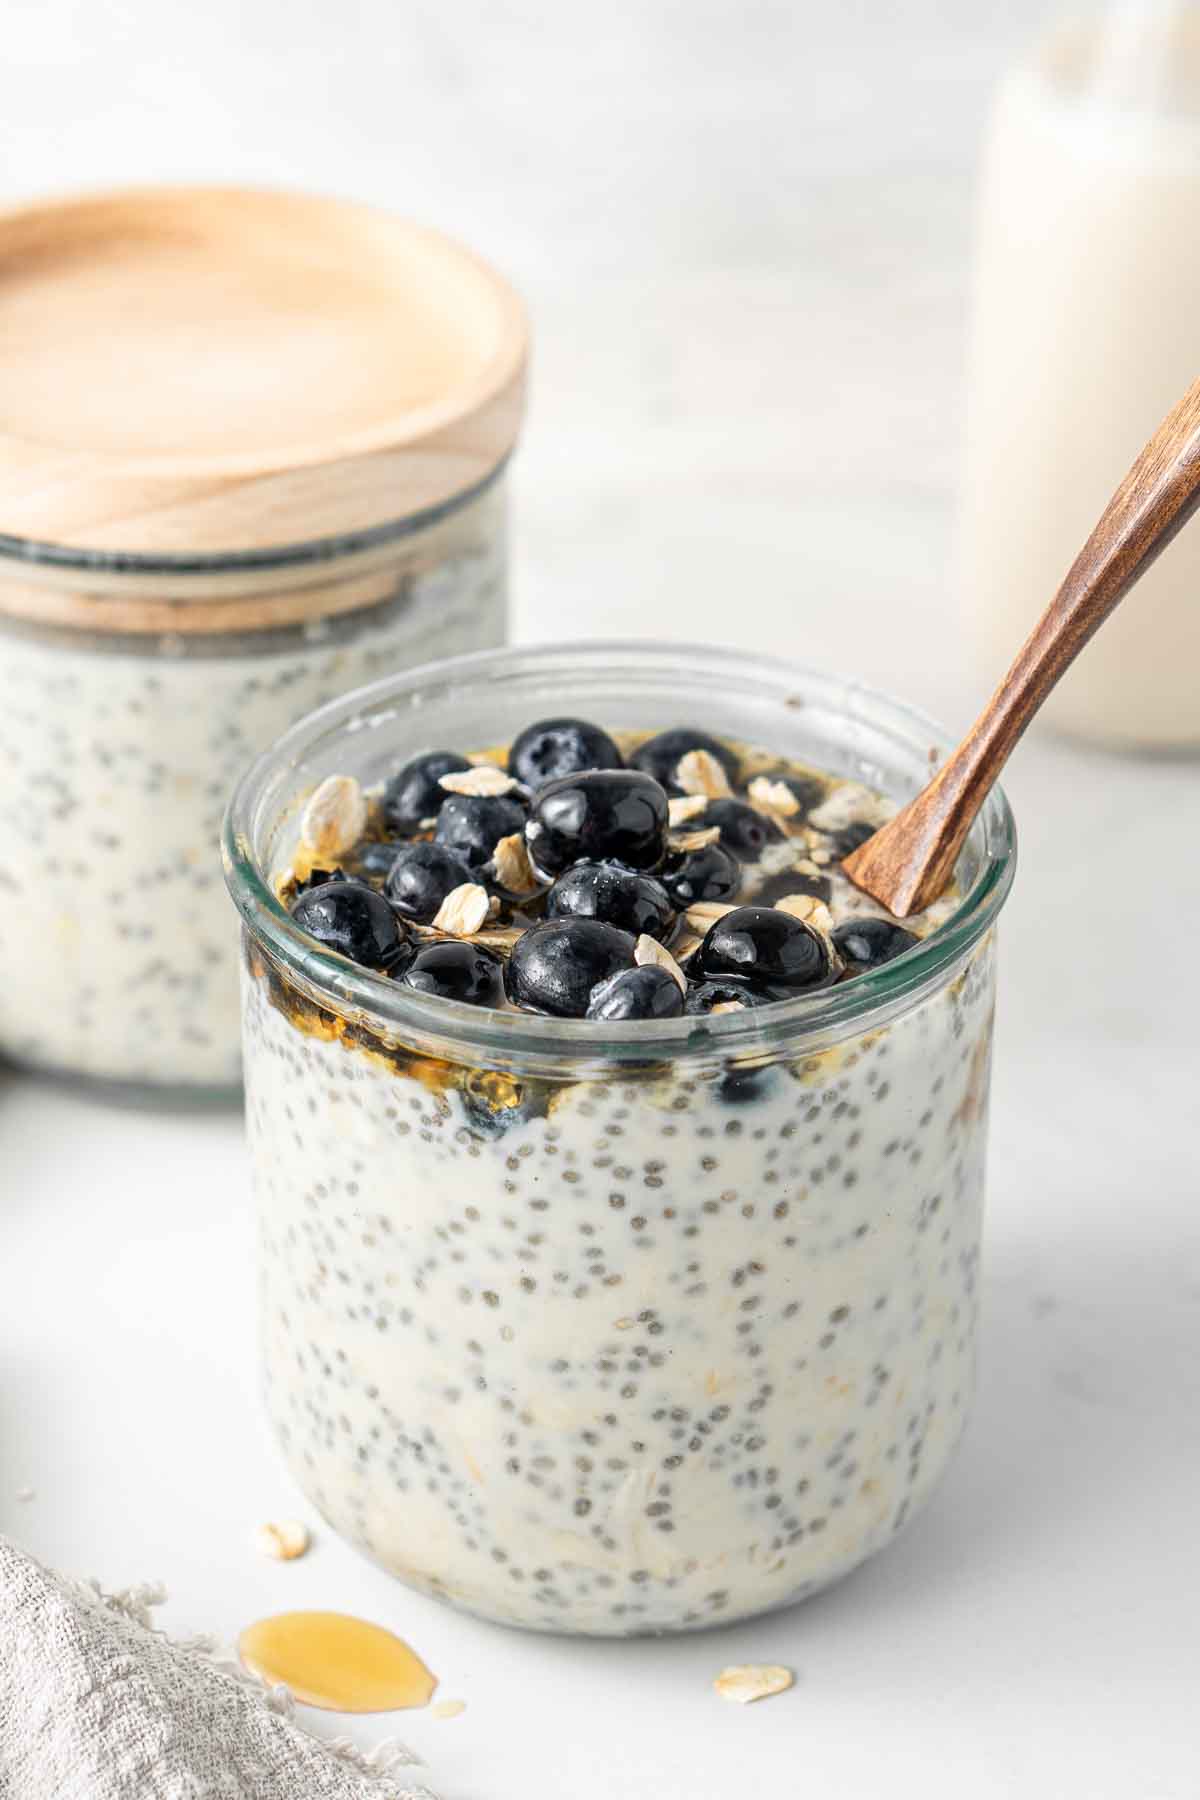 Overnight oats in a jar topped with fresh blueberries and a spoon.